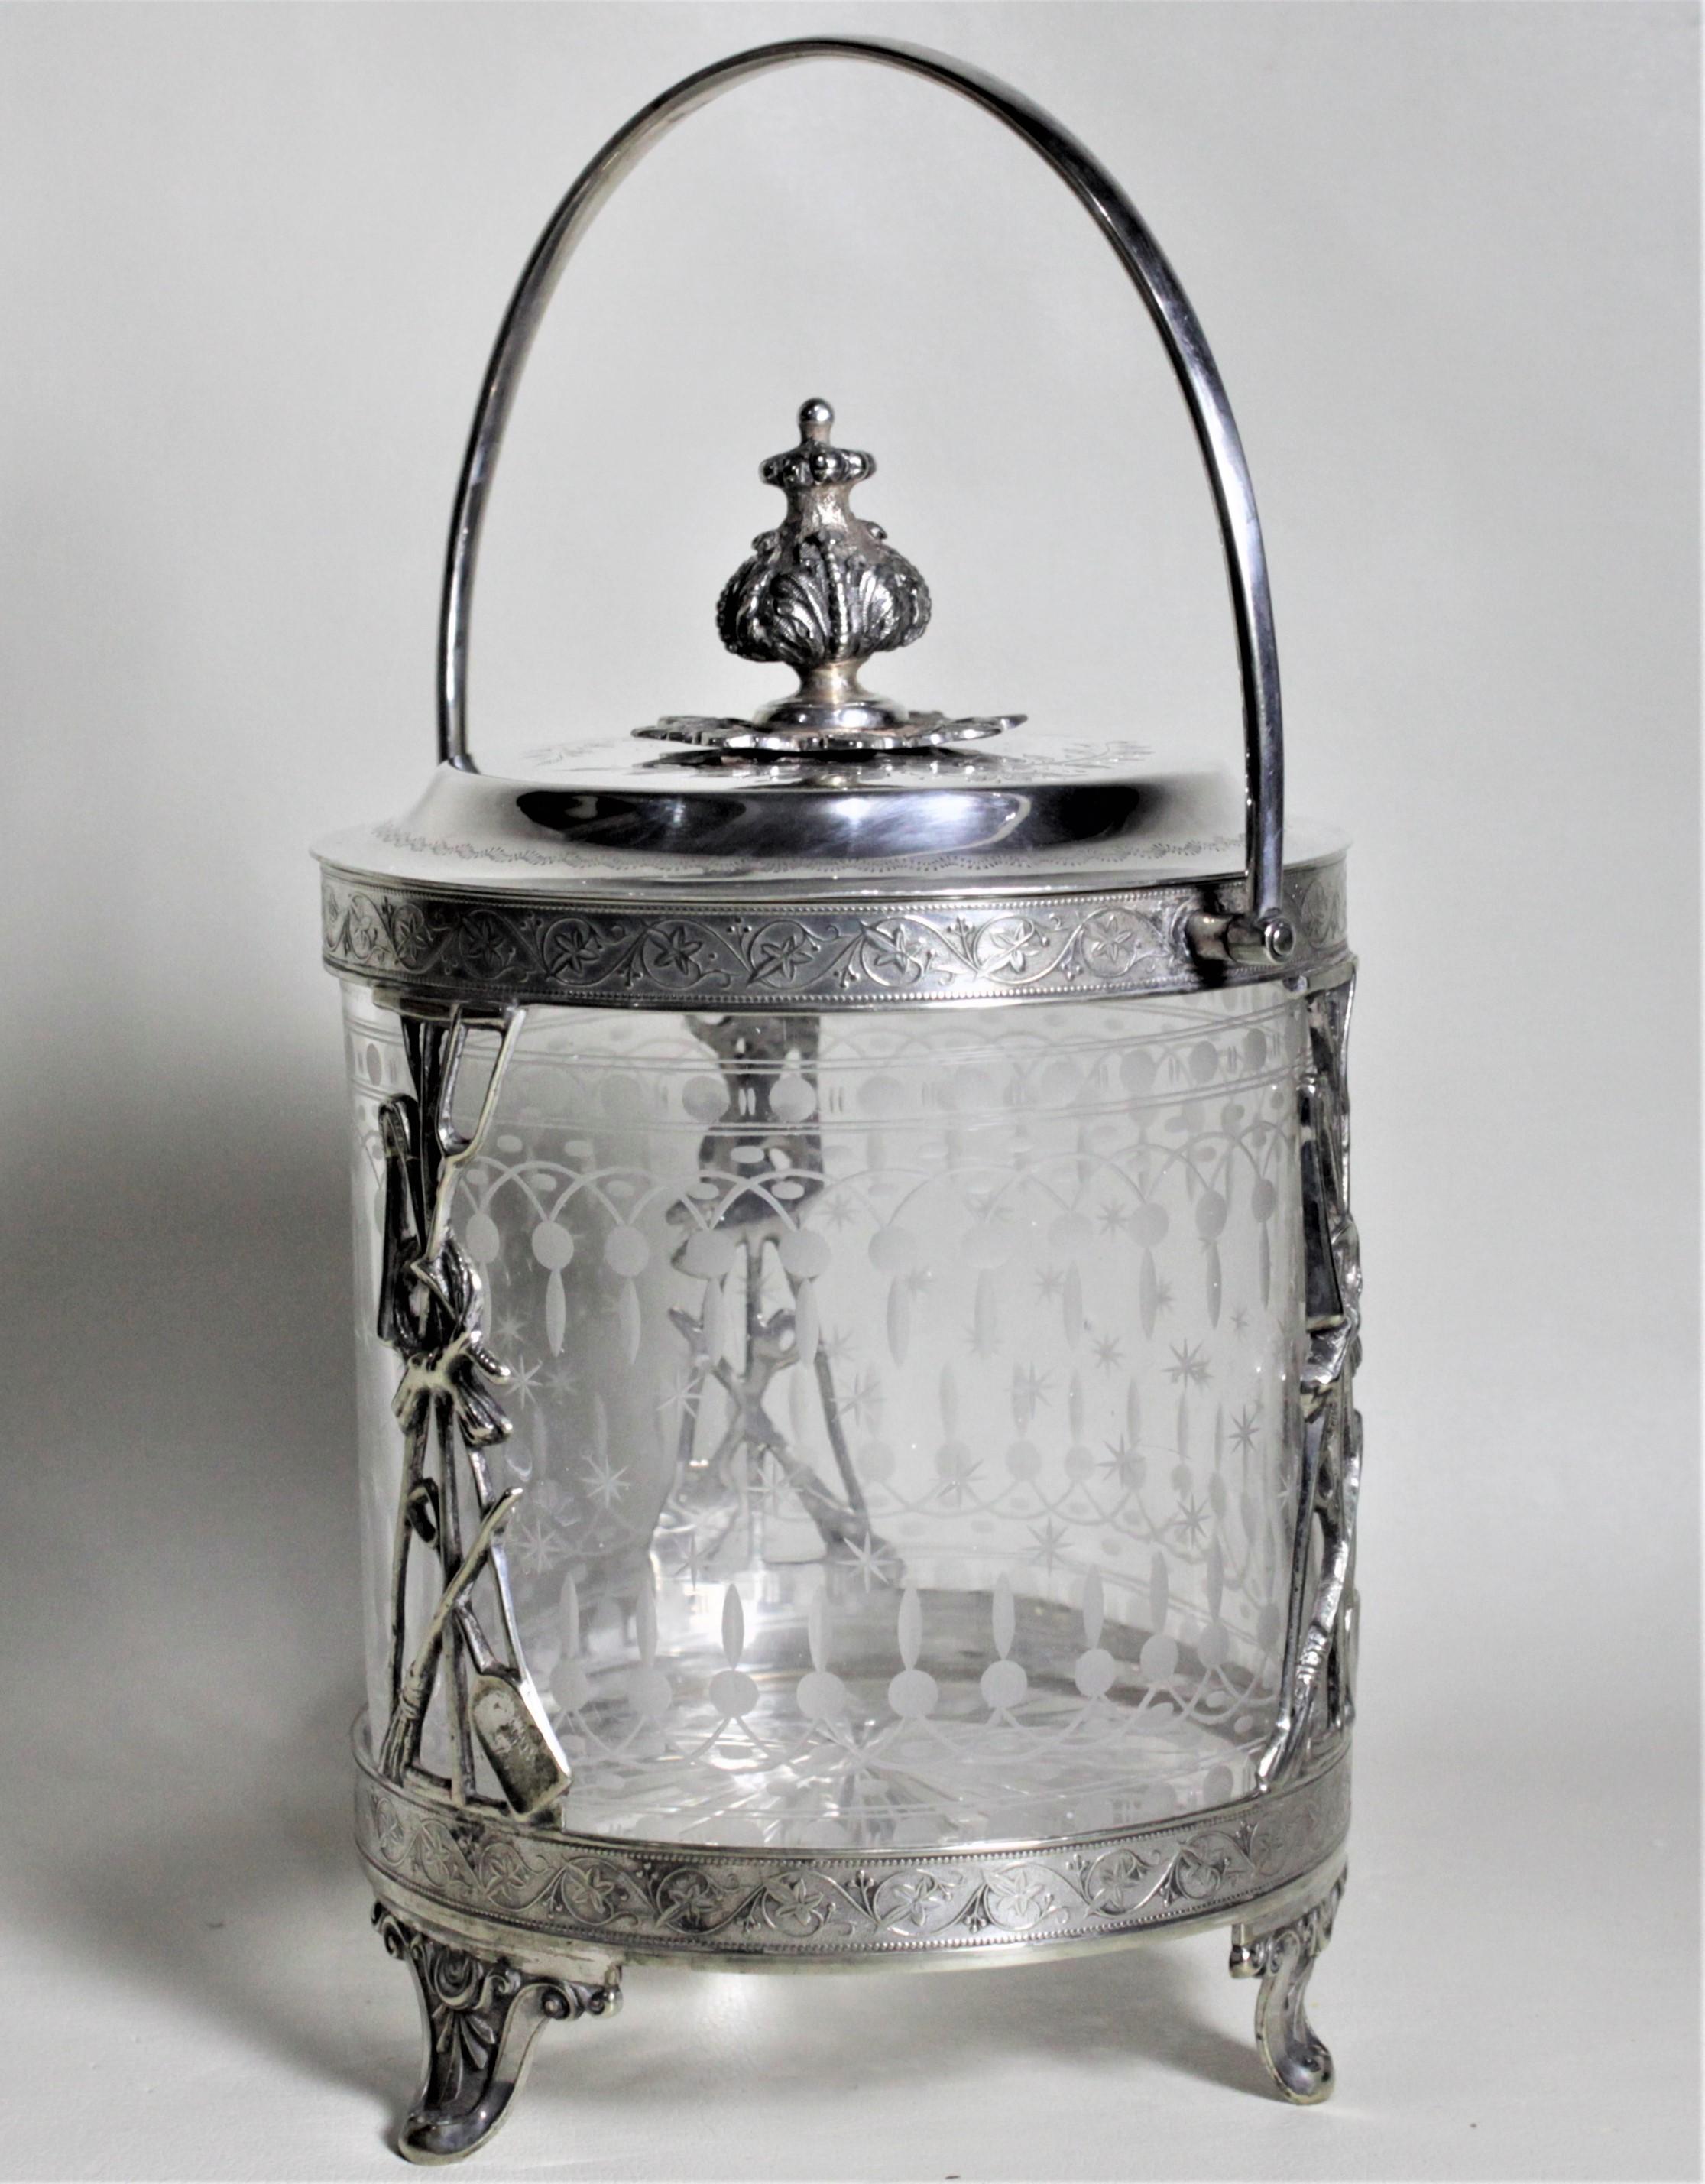 English Antique Silver Plated Biscuit Barrel with Figural Decor & Etched Glass Insert